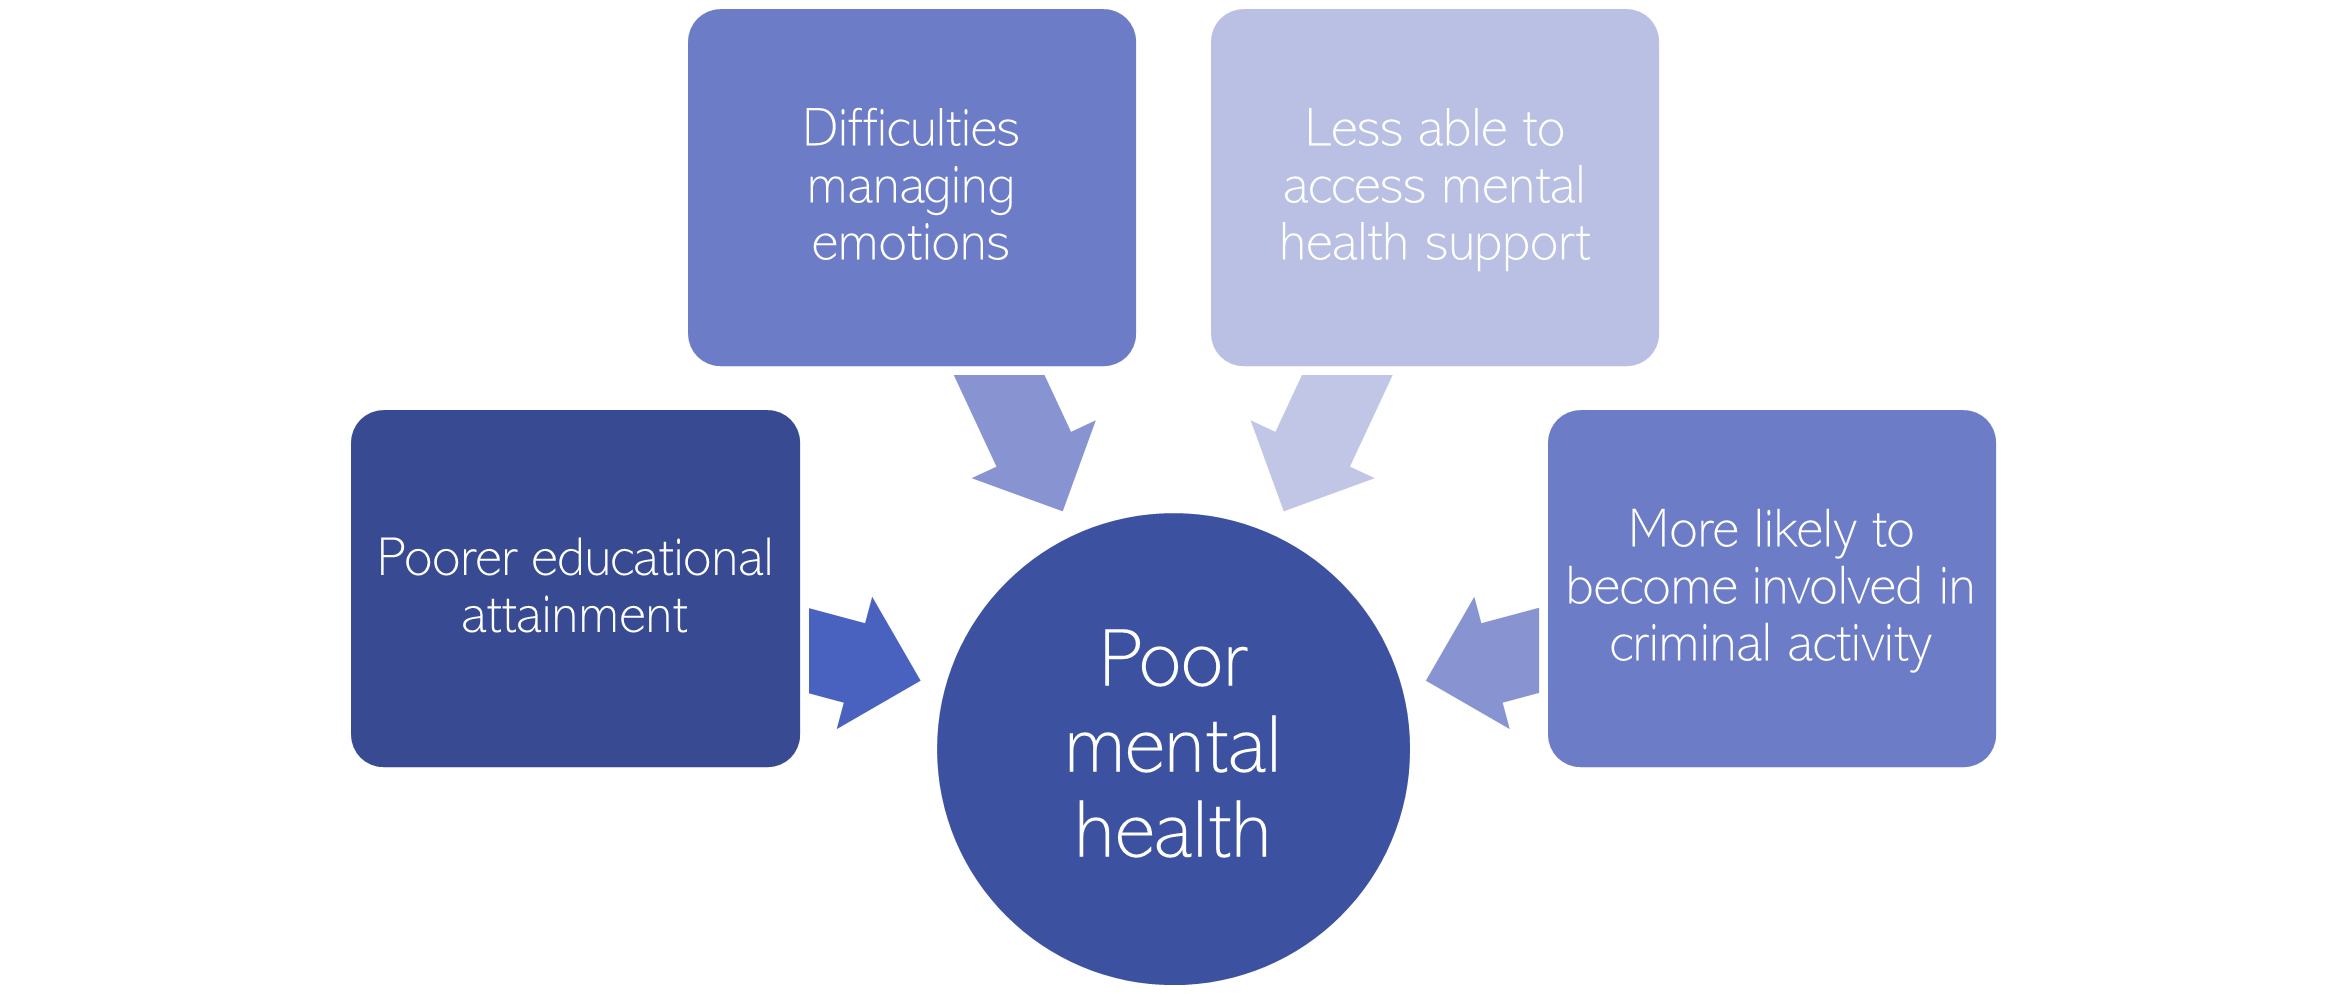 Reasons include poor educational attainment, difficulties managing emotions, difficulties accessing mental heatlh support and being more likely to become involved in criminal activity. 